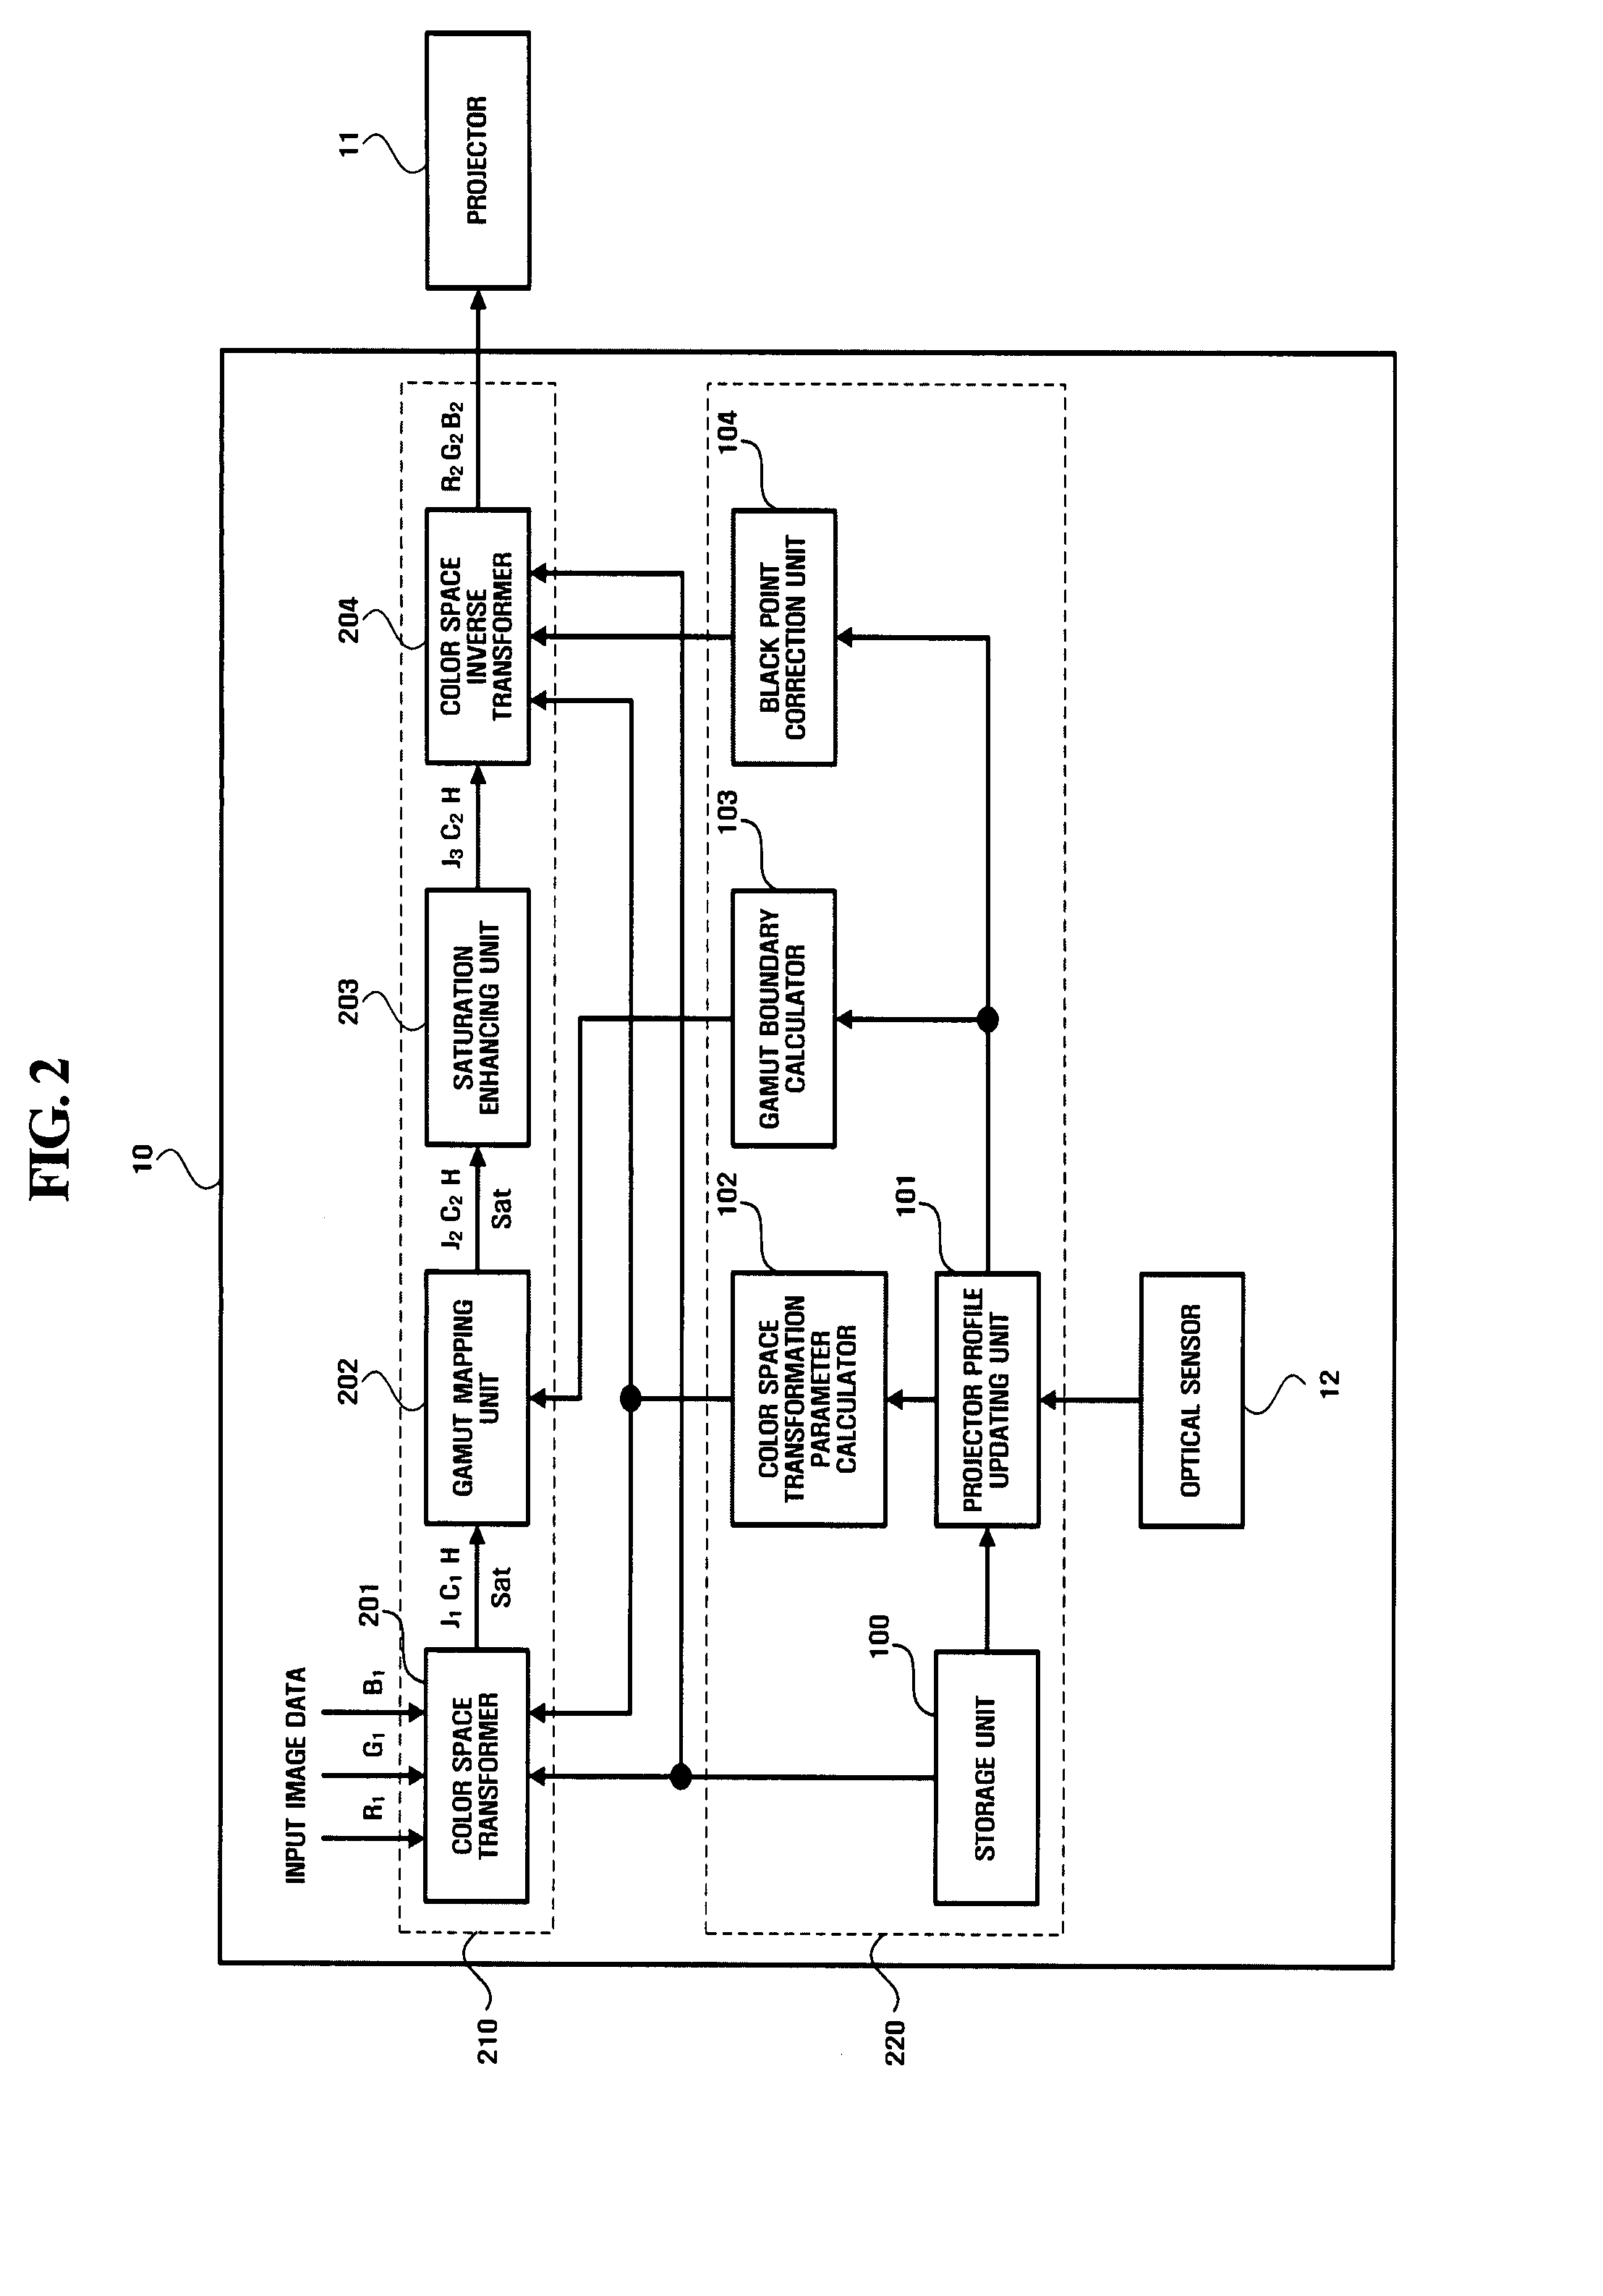 Apparatus and method for ambient light adaptive color correction